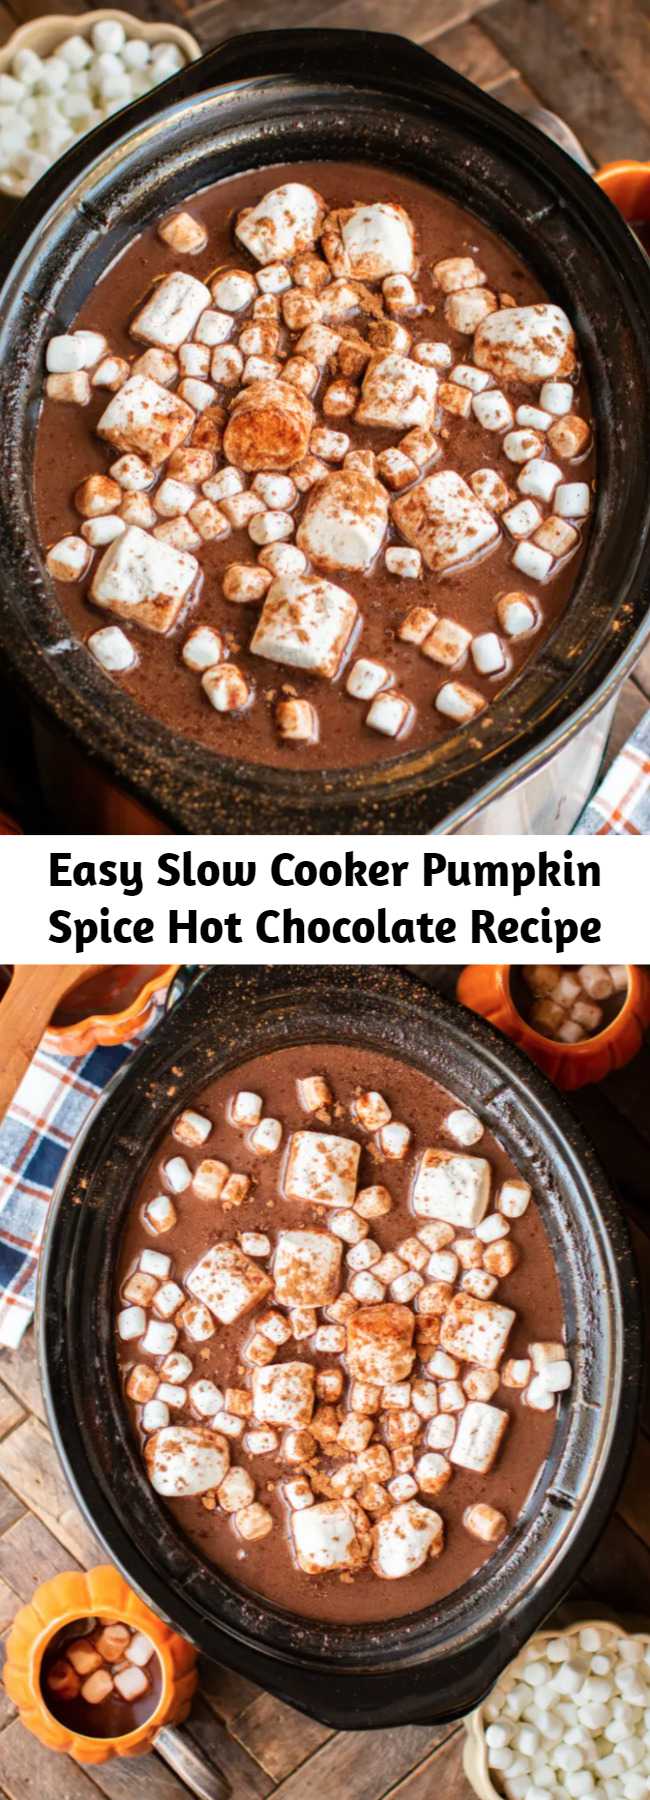 Easy Slow Cooker Pumpkin Spice Hot Chocolate Recipe - Pumpkin Spice Hot Chocolate easily made in the slow cooker! It's a delicious party drink that you and your guests will love.